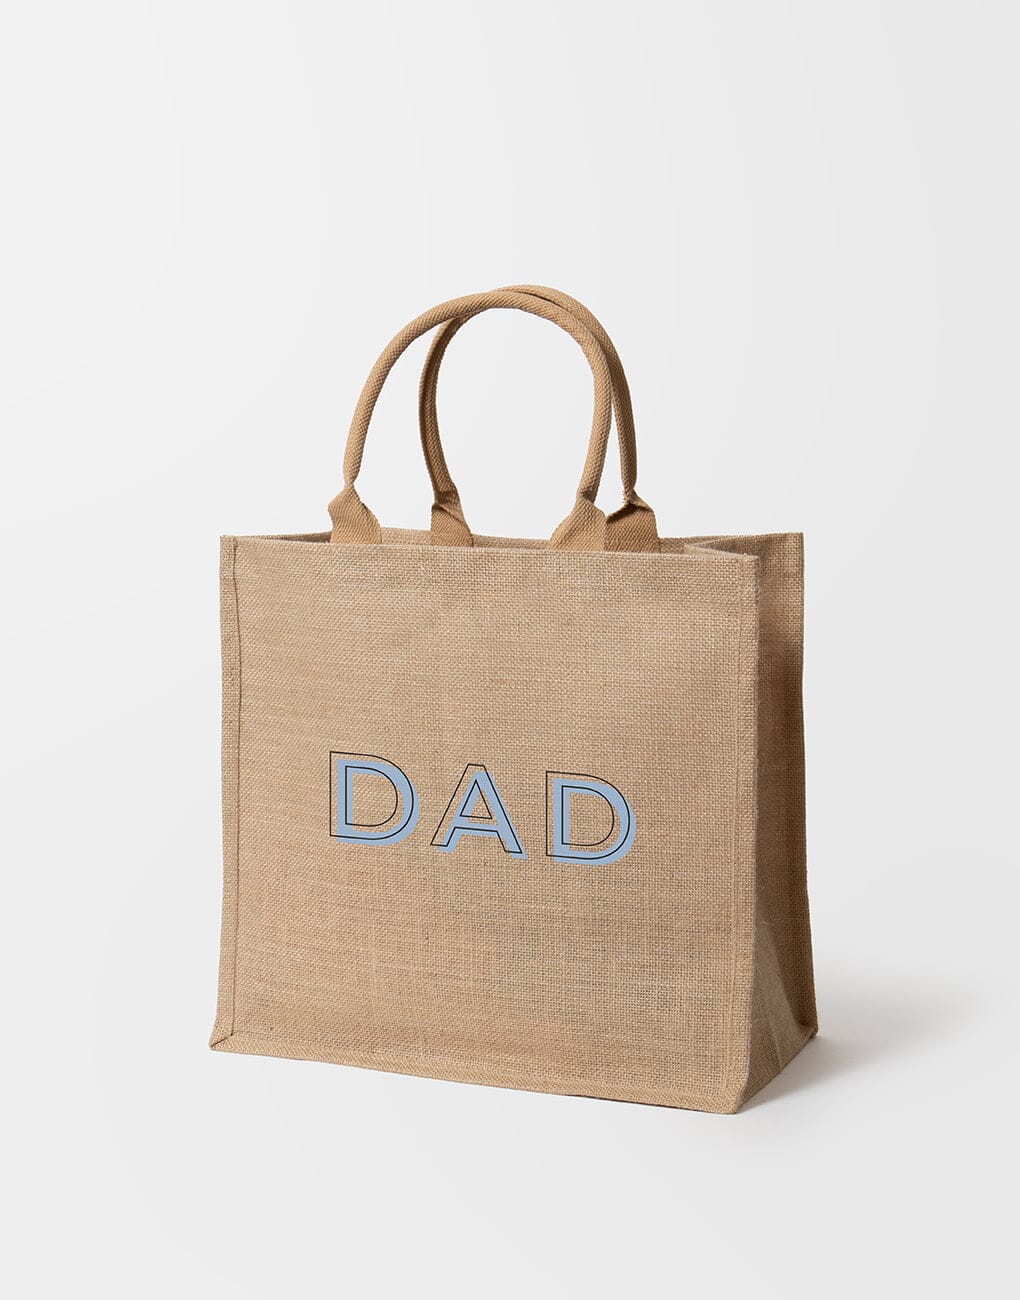 Shopping Tote - Dad | The Little Market